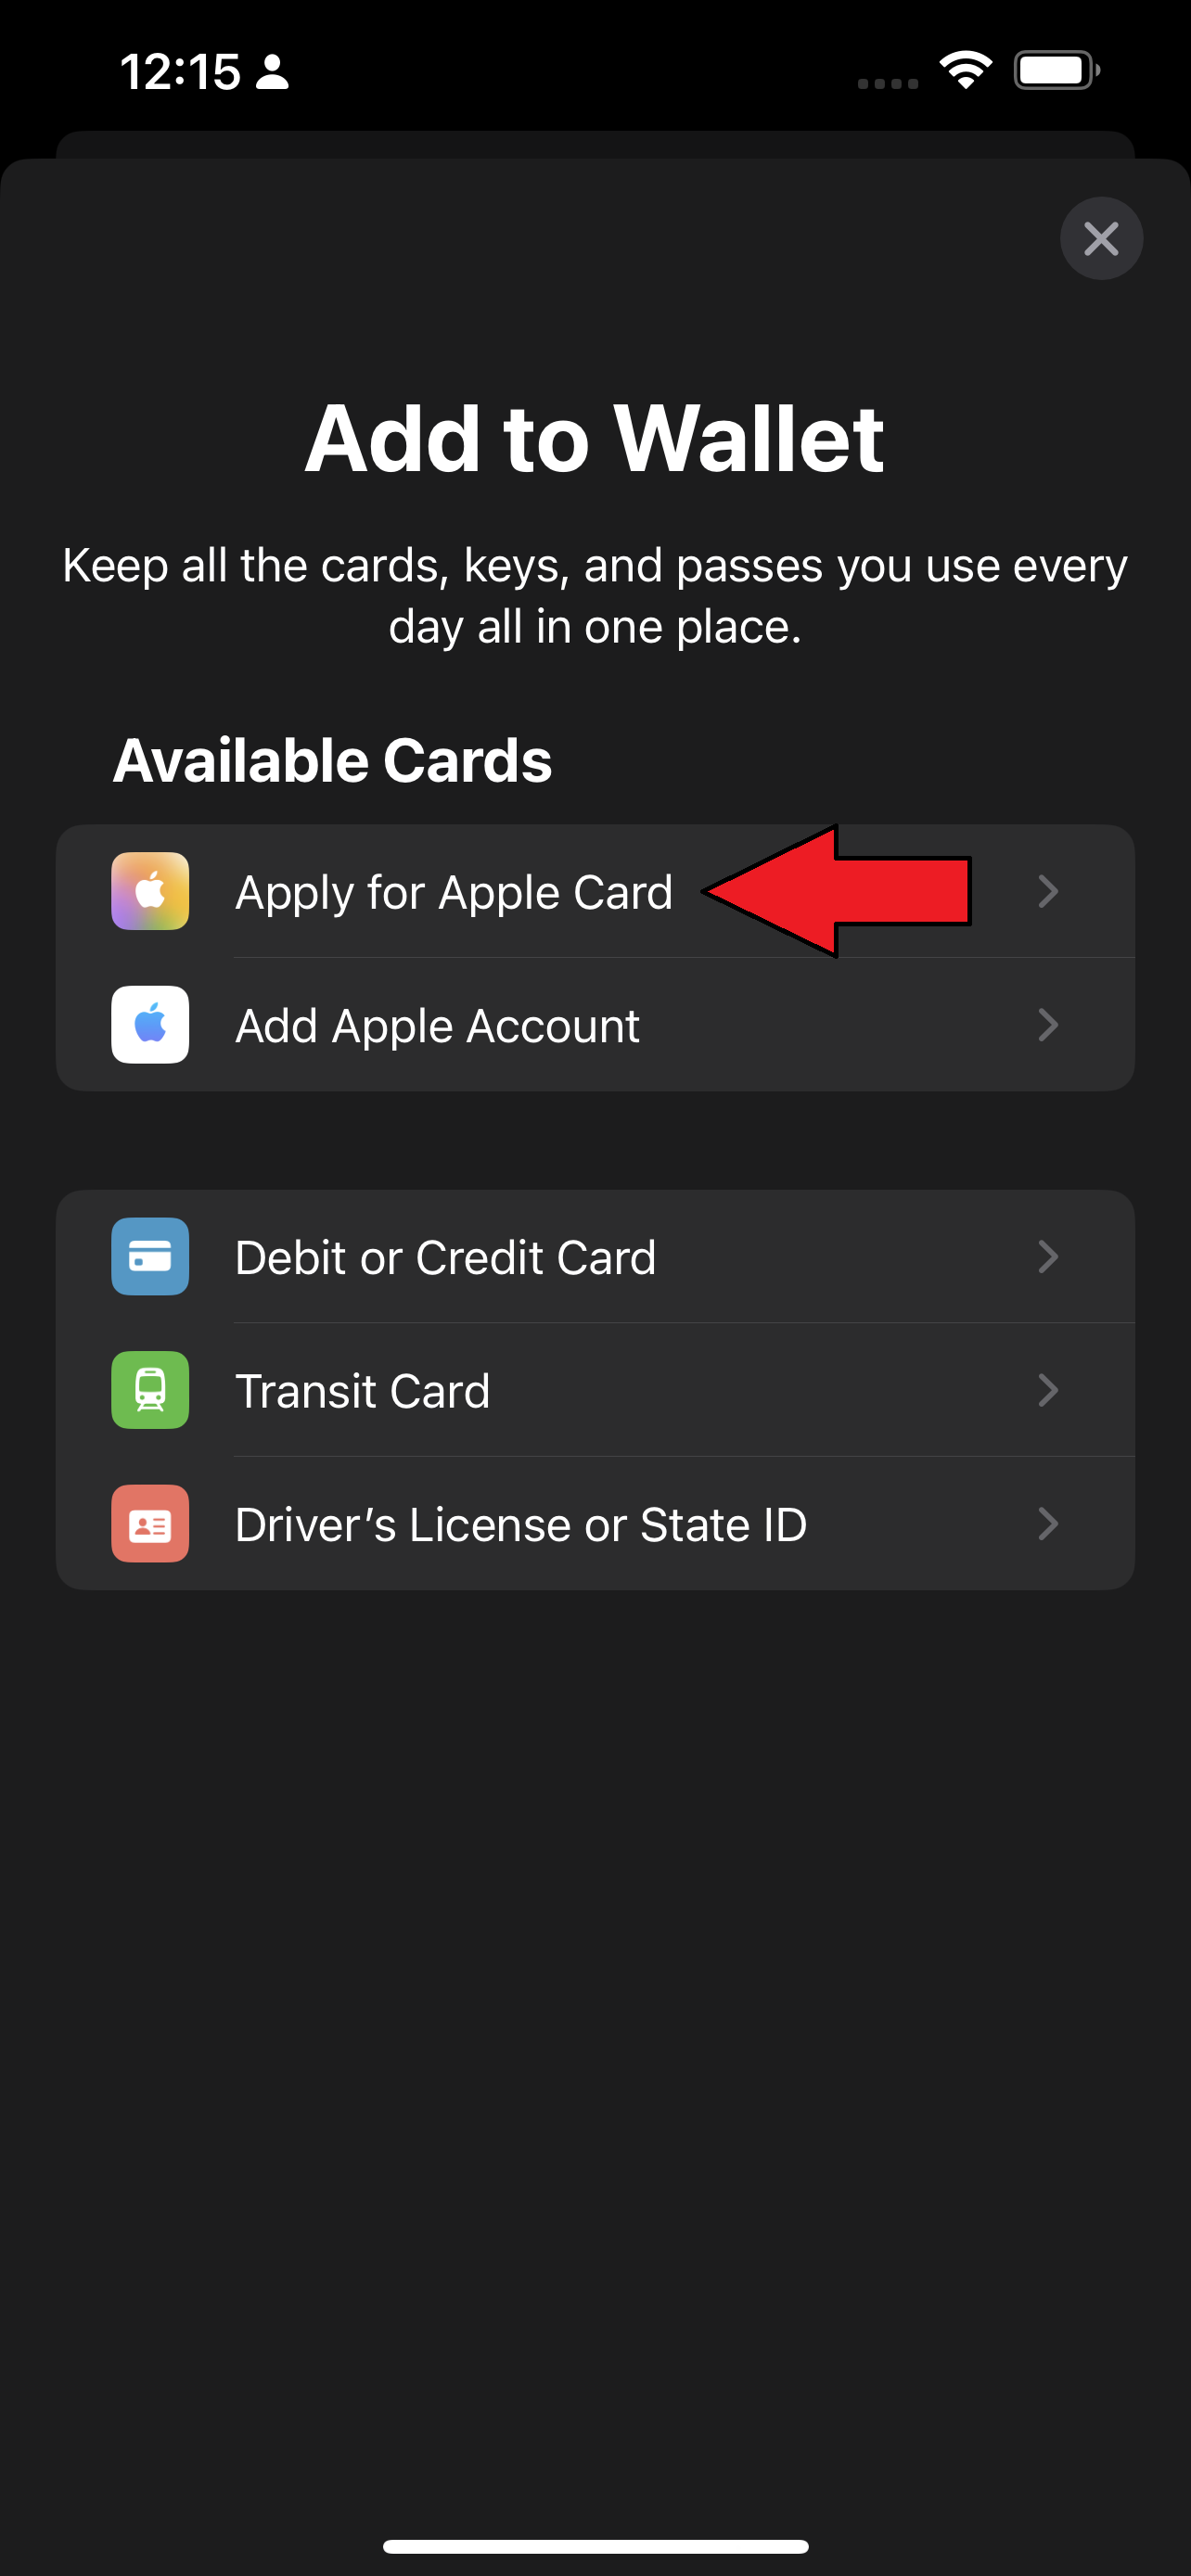 Arrow pointing at Apple for Apple Card